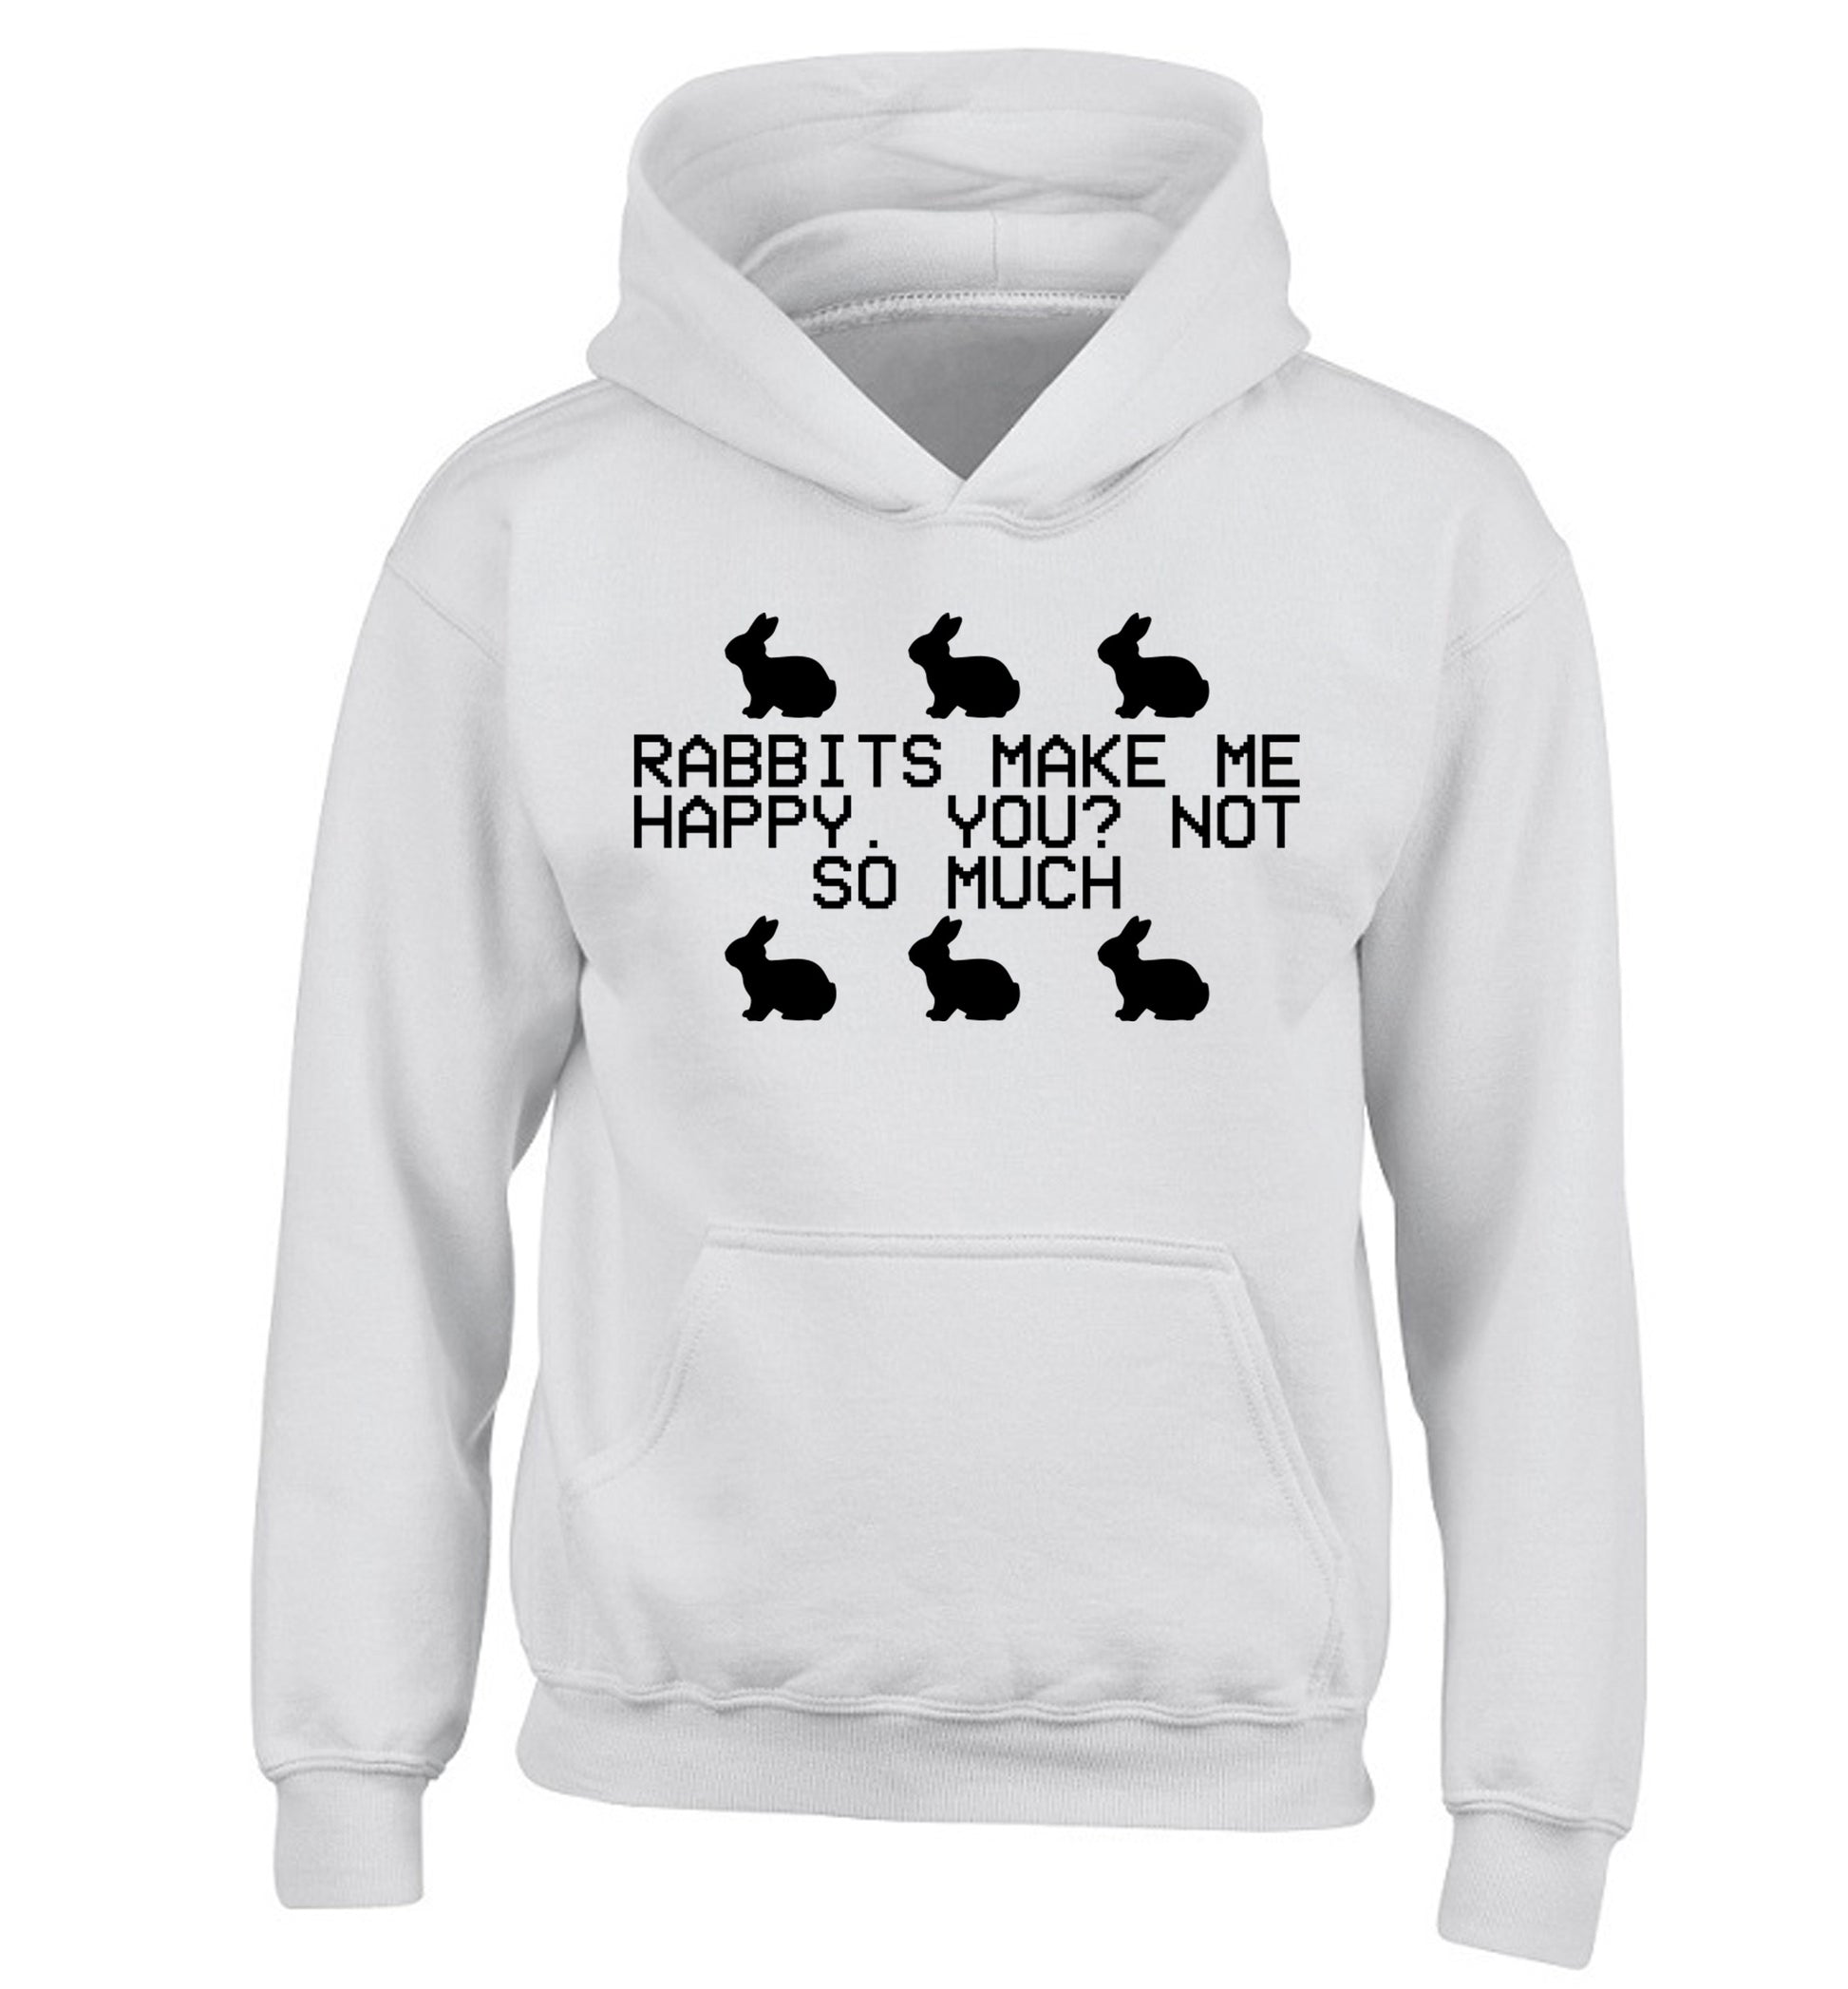 Rabbits make me happy, you not so much children's white hoodie 12-14 Years